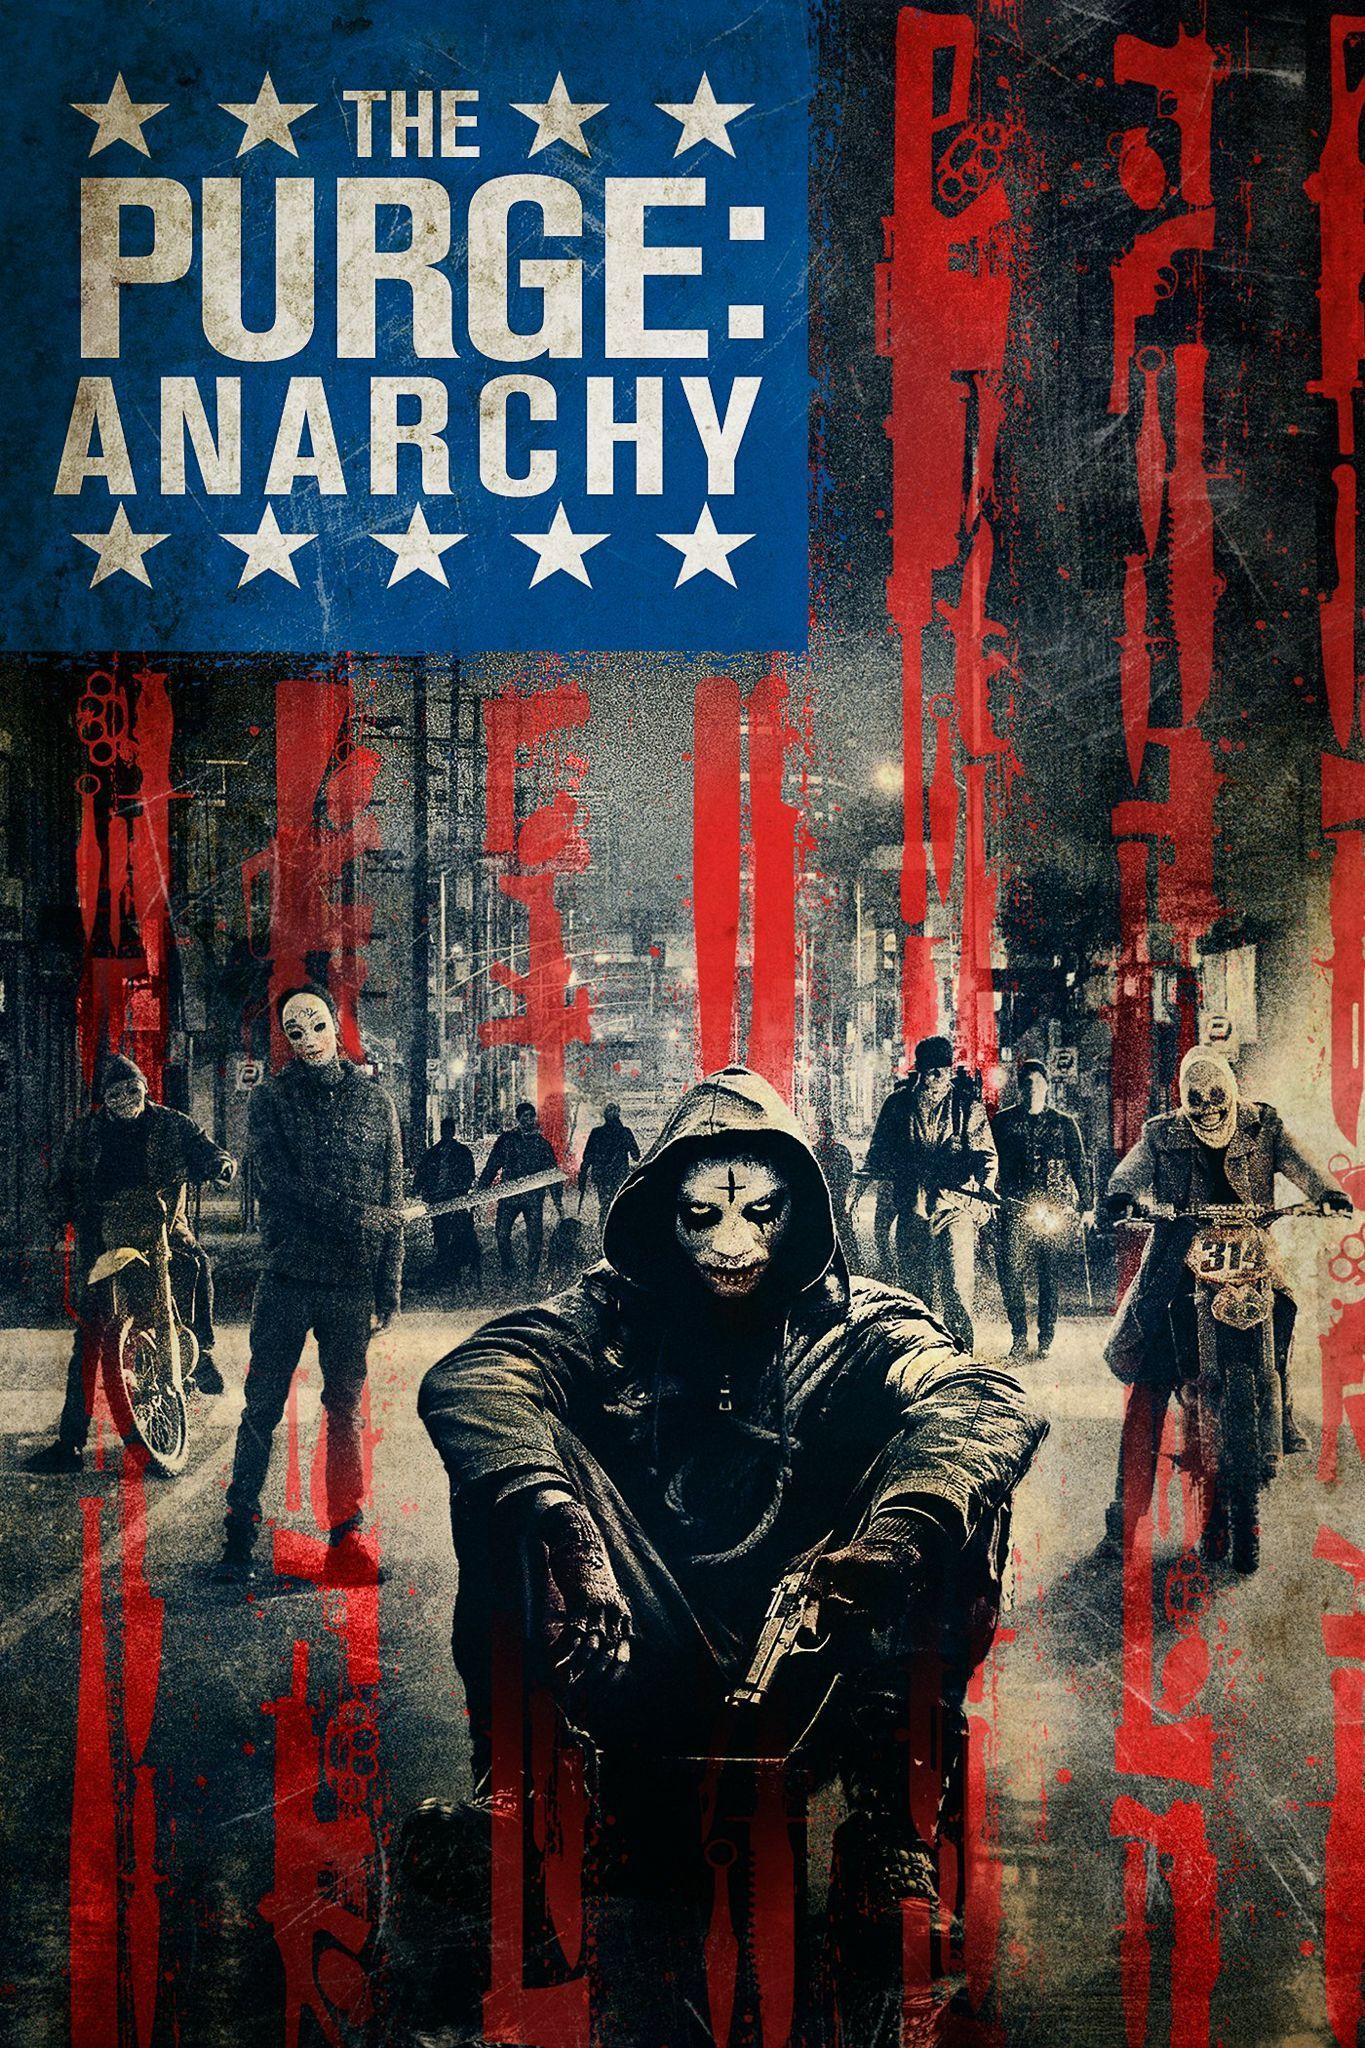 The Purge: Anarchy (2014). Movies. Movie, Horror